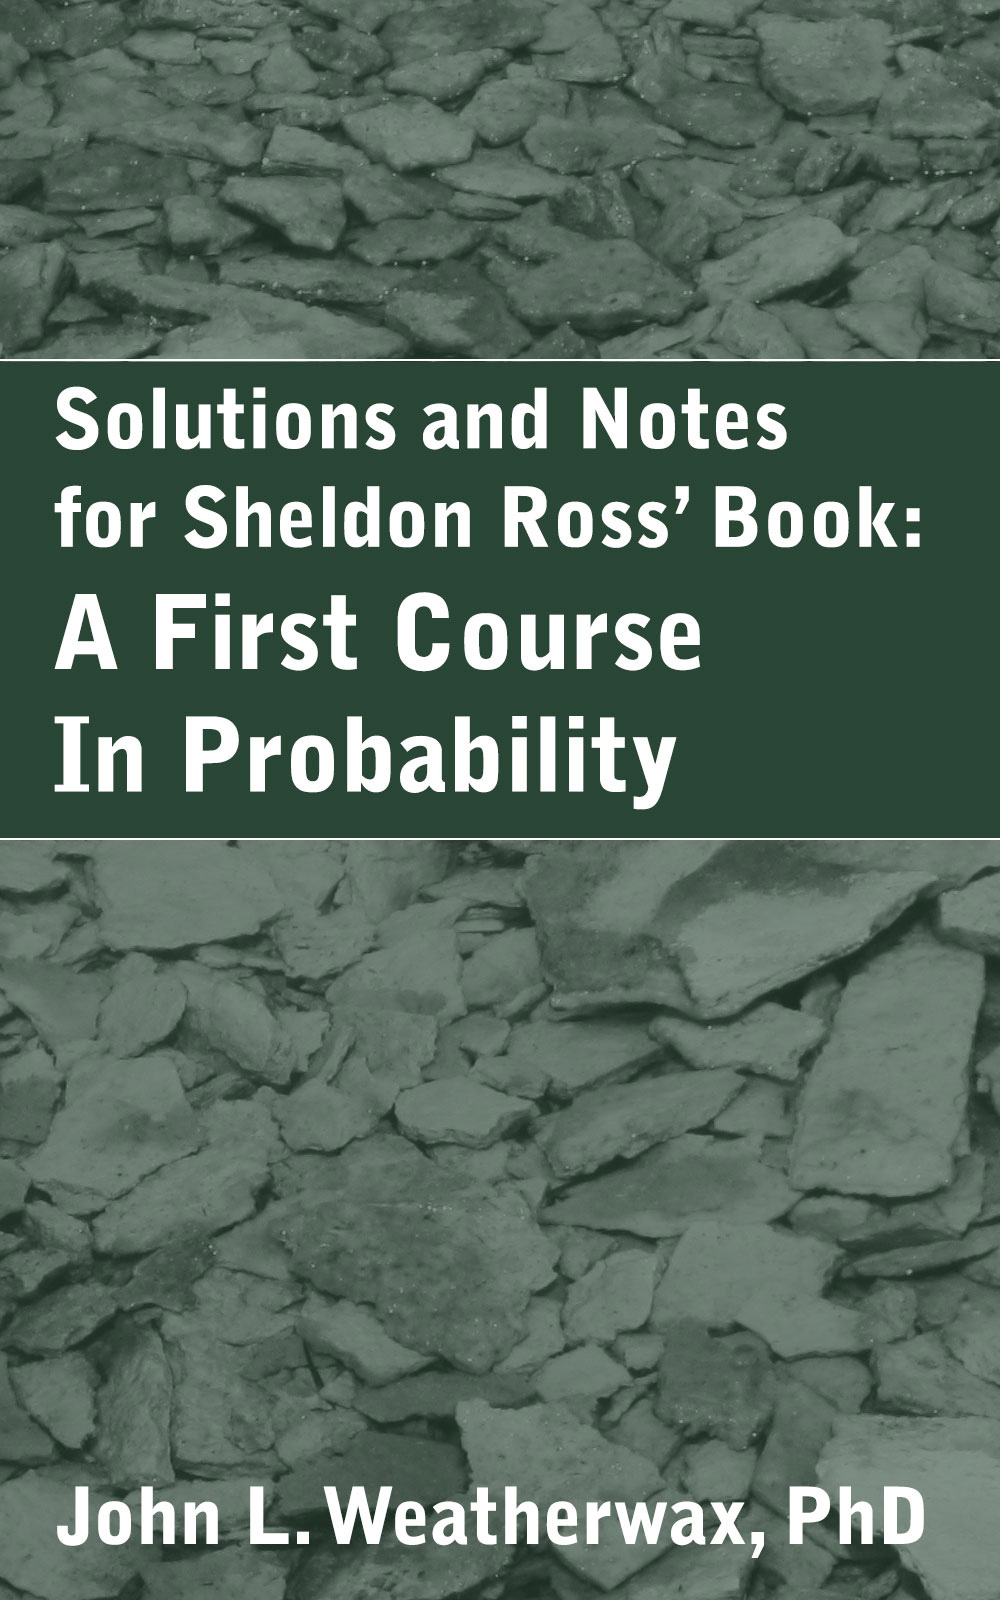 Solutions and Notes for Sheldon Ross' Book: A First Course in Probability